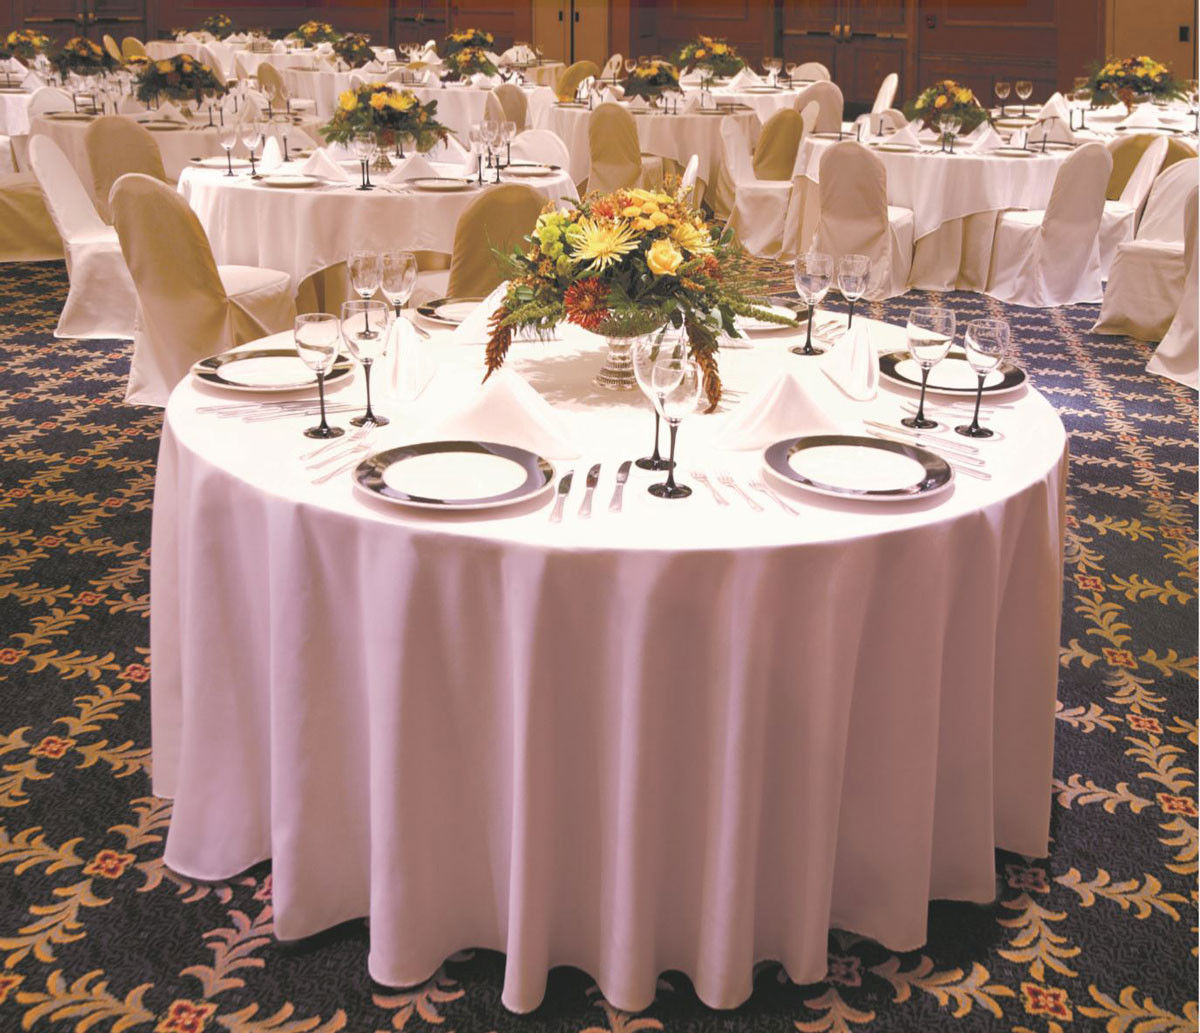 Is the Horizon by Milliken table linen a 120" round table cloth?